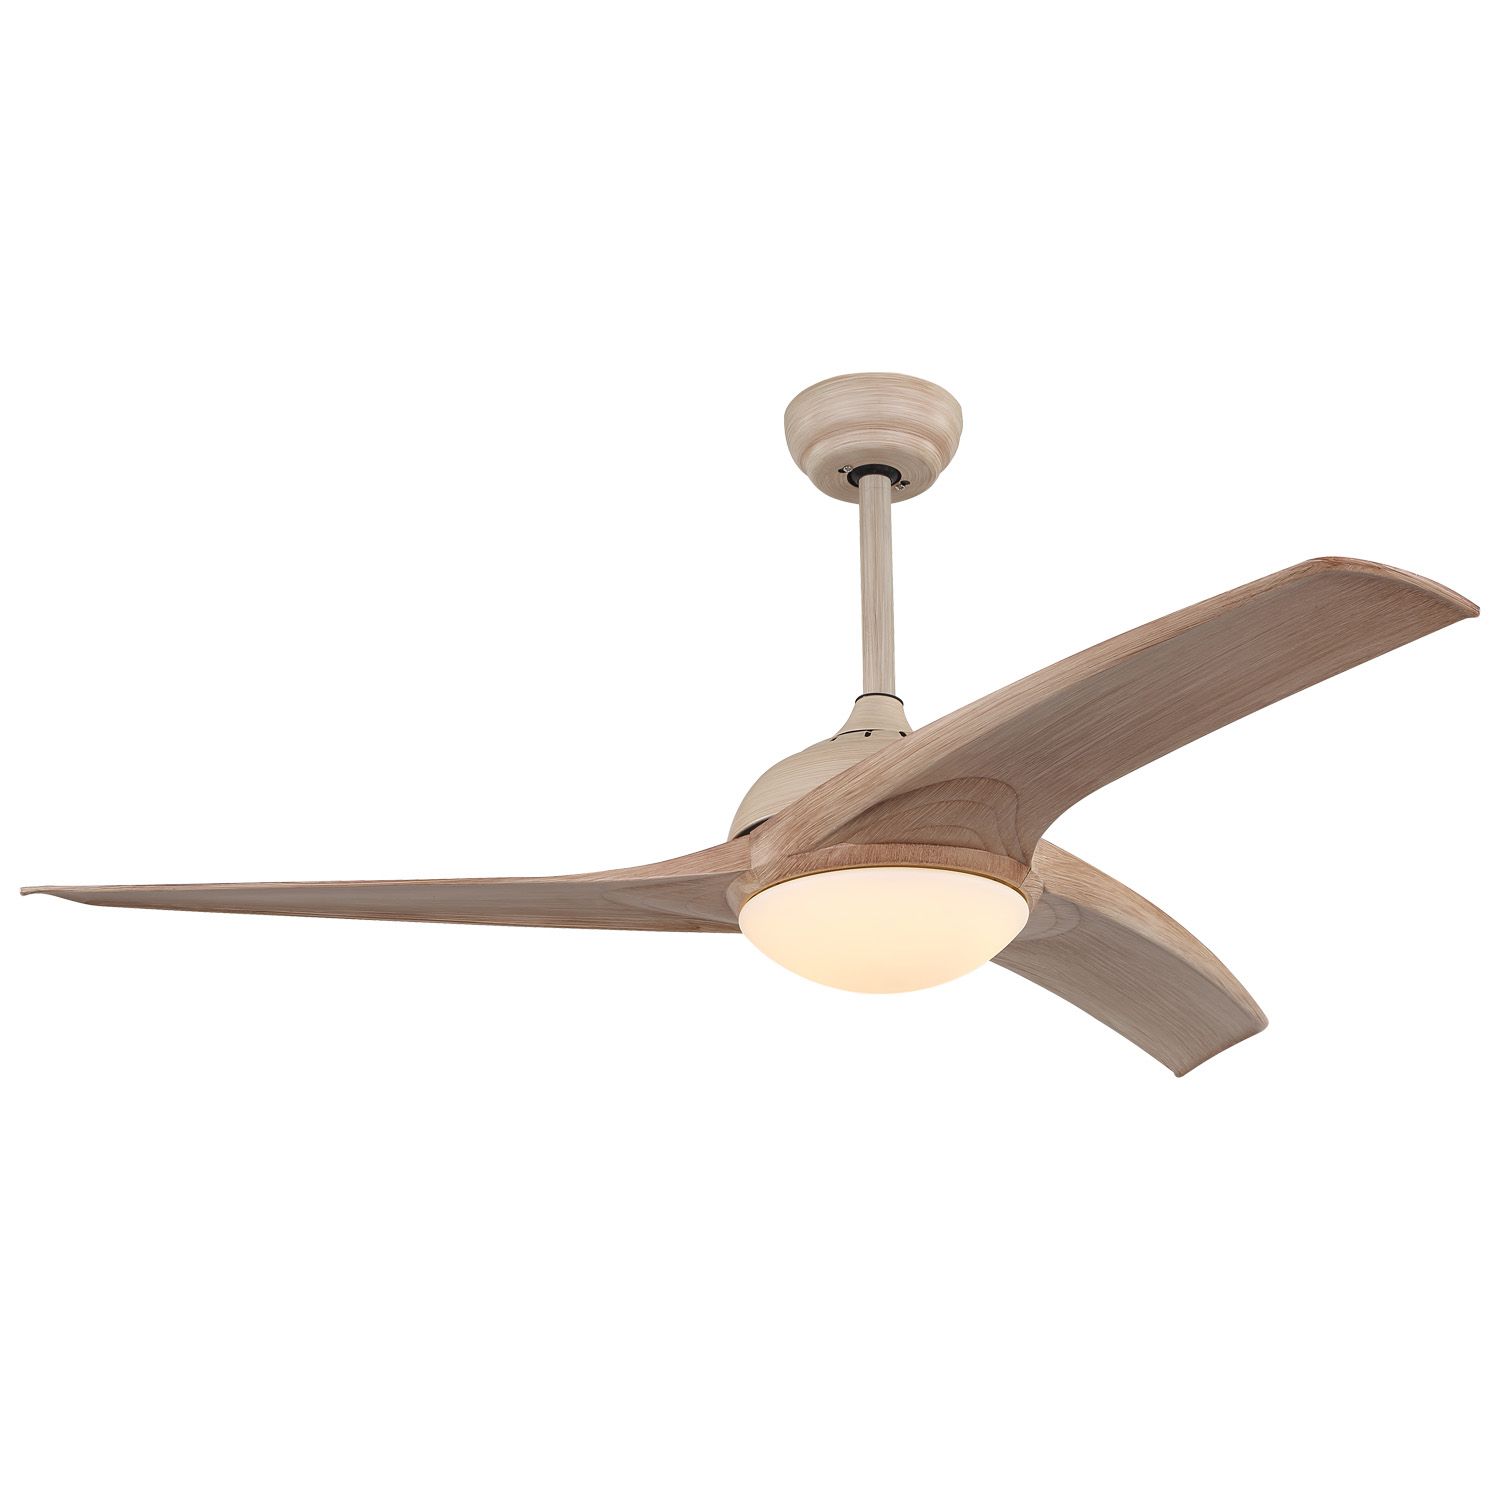 Bedroom Ceiling Fans With Remote Control